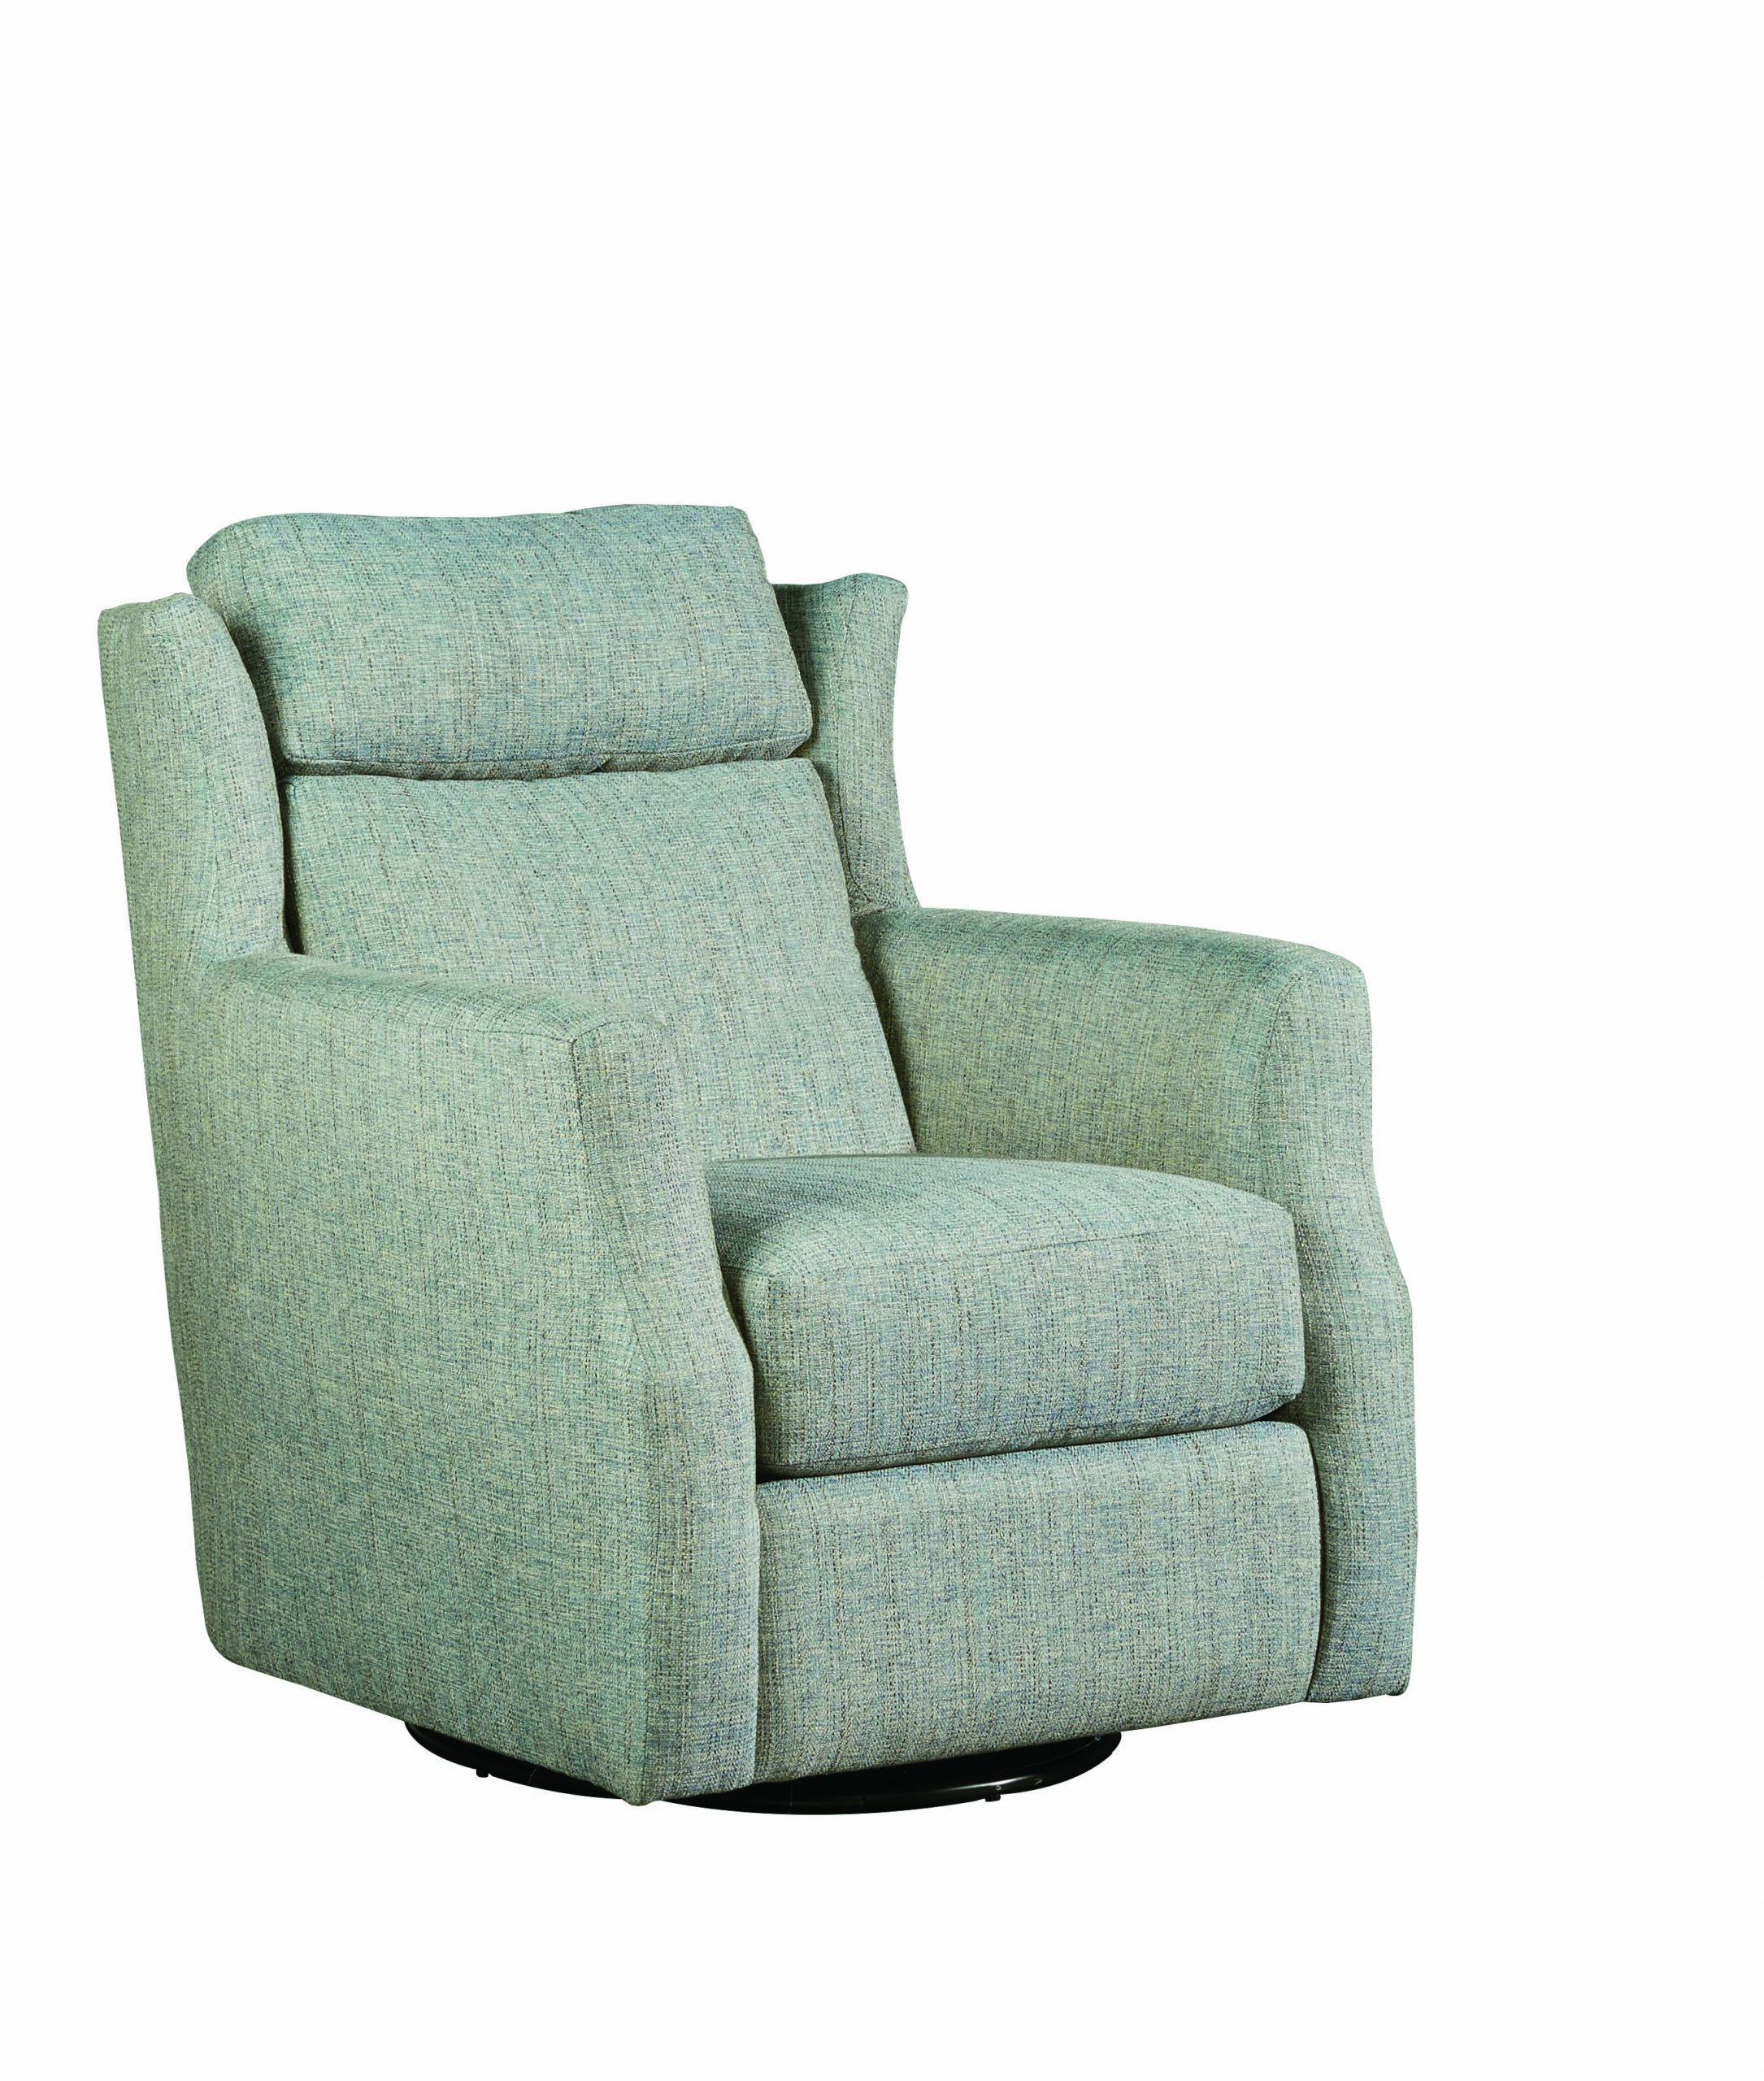 Southern Motion Furniture Glider